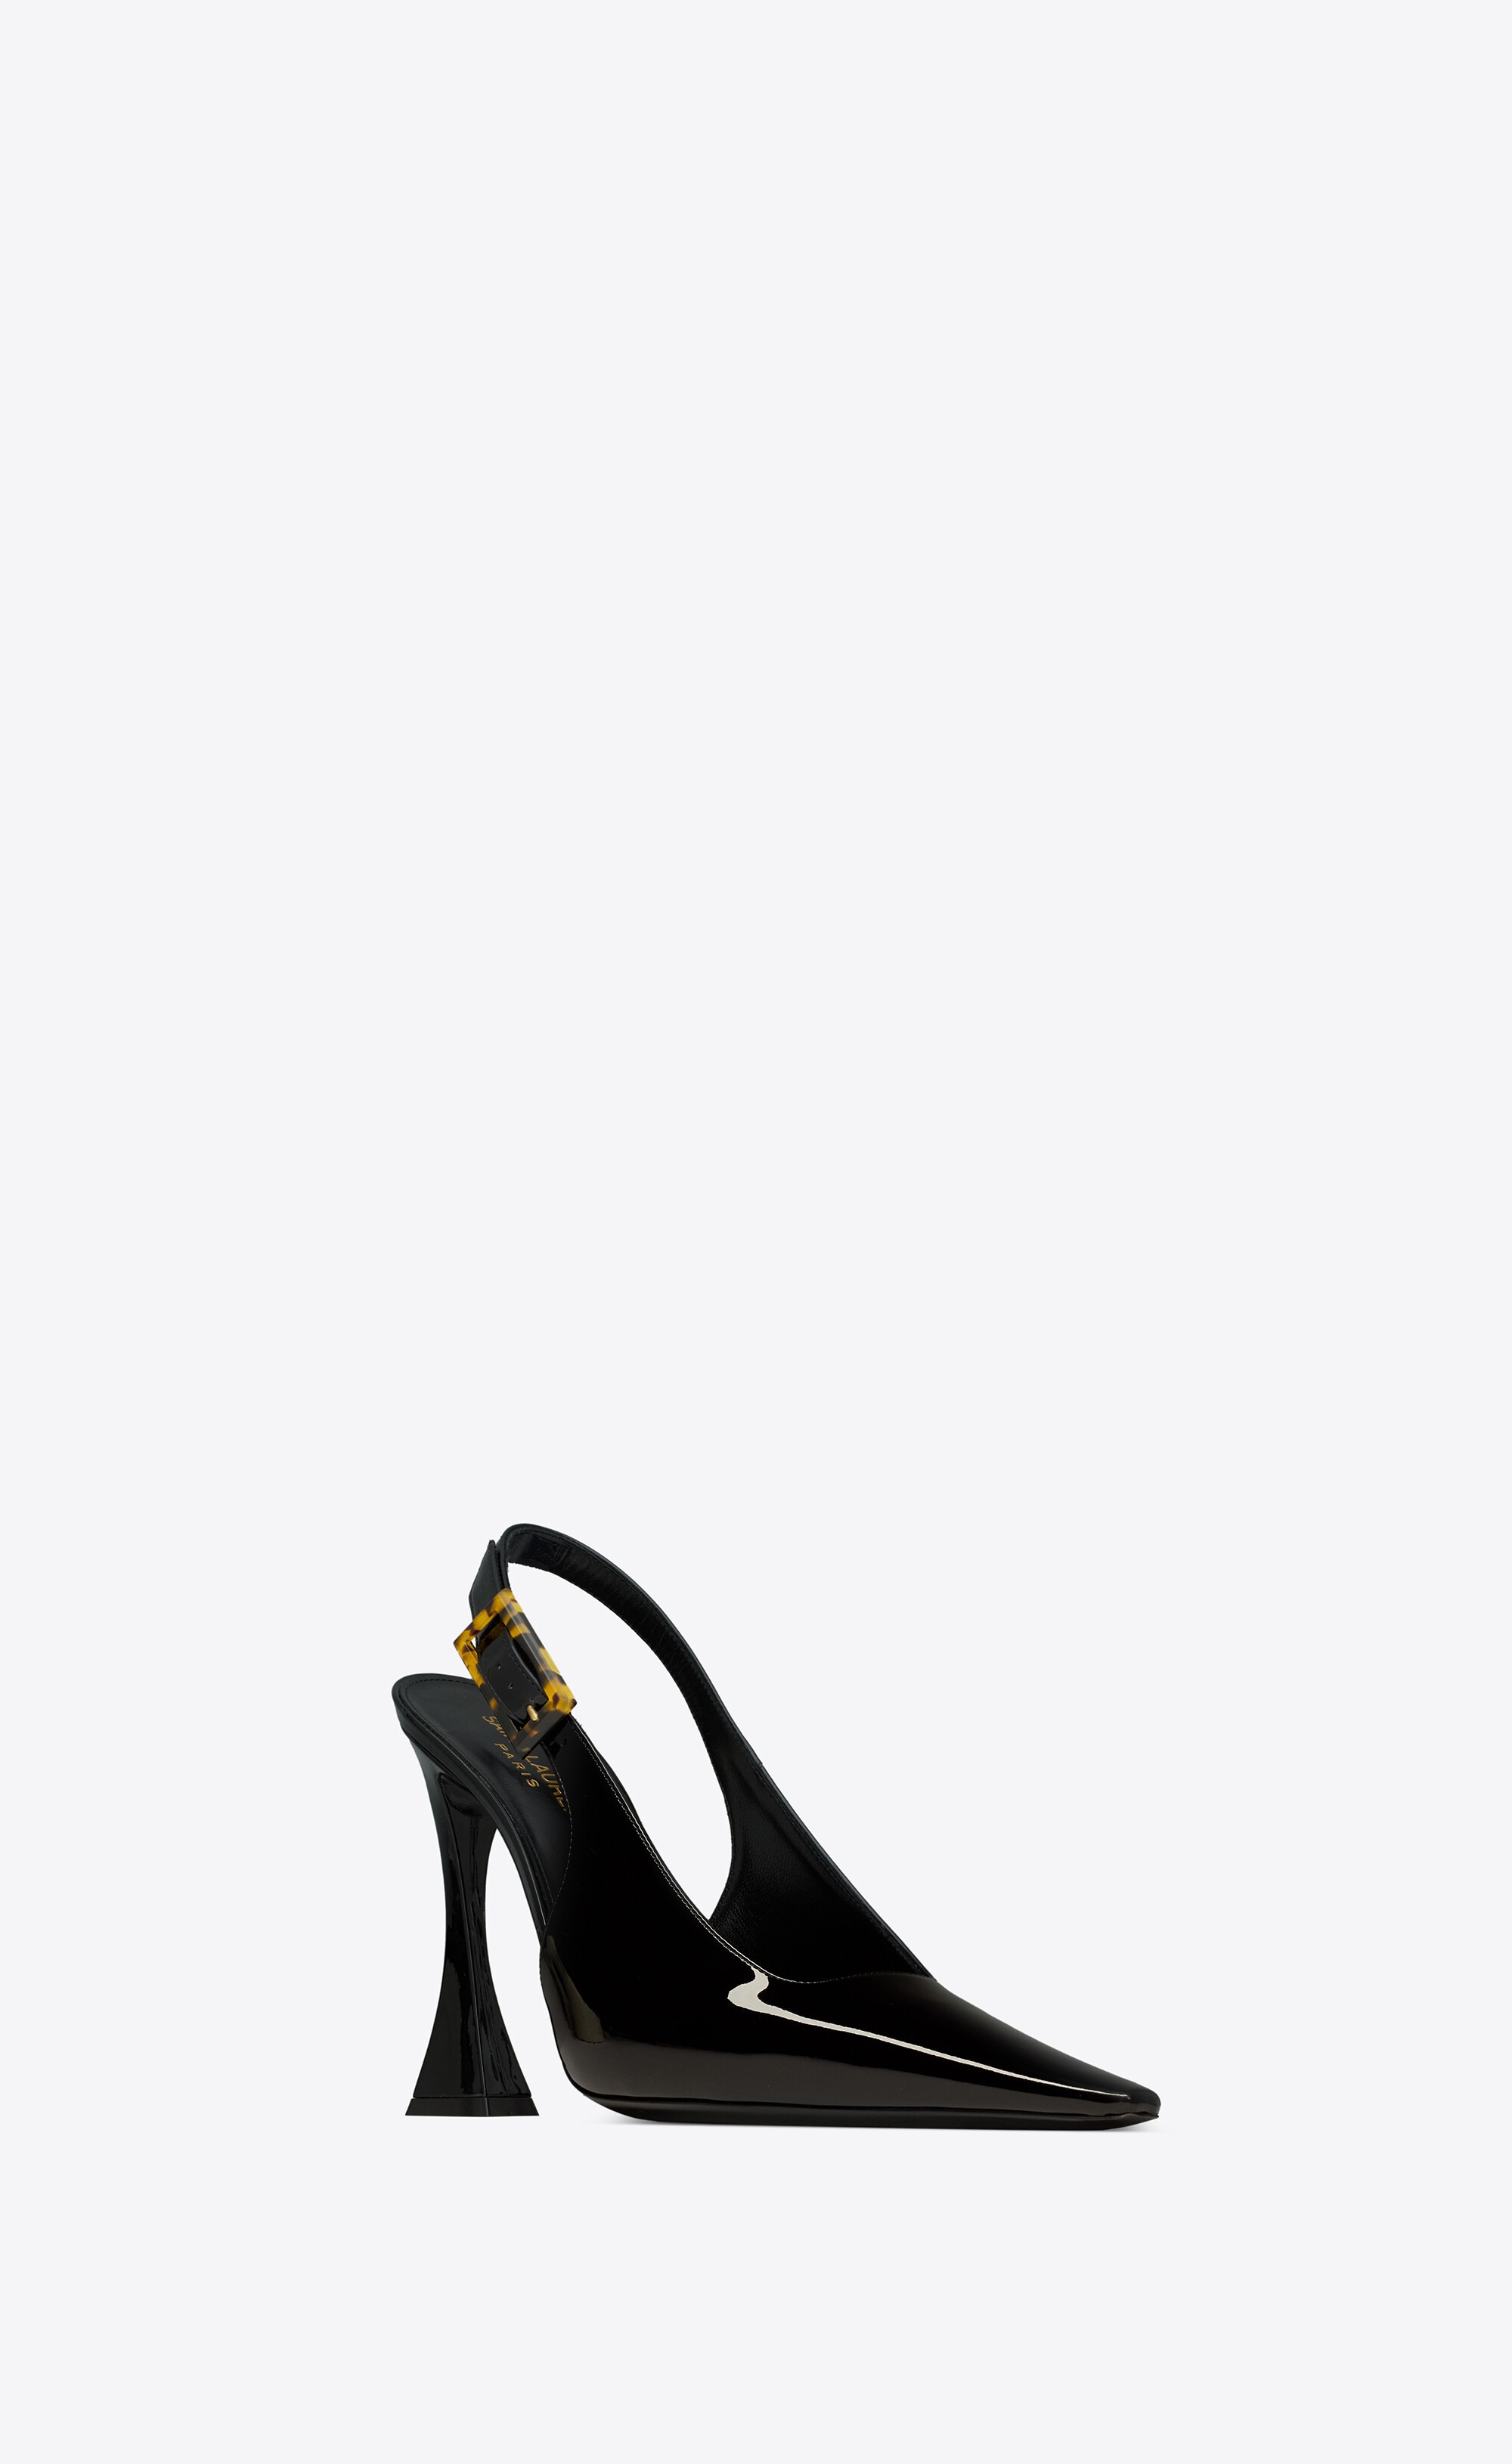 dune slingback pumps in patent leather - 3